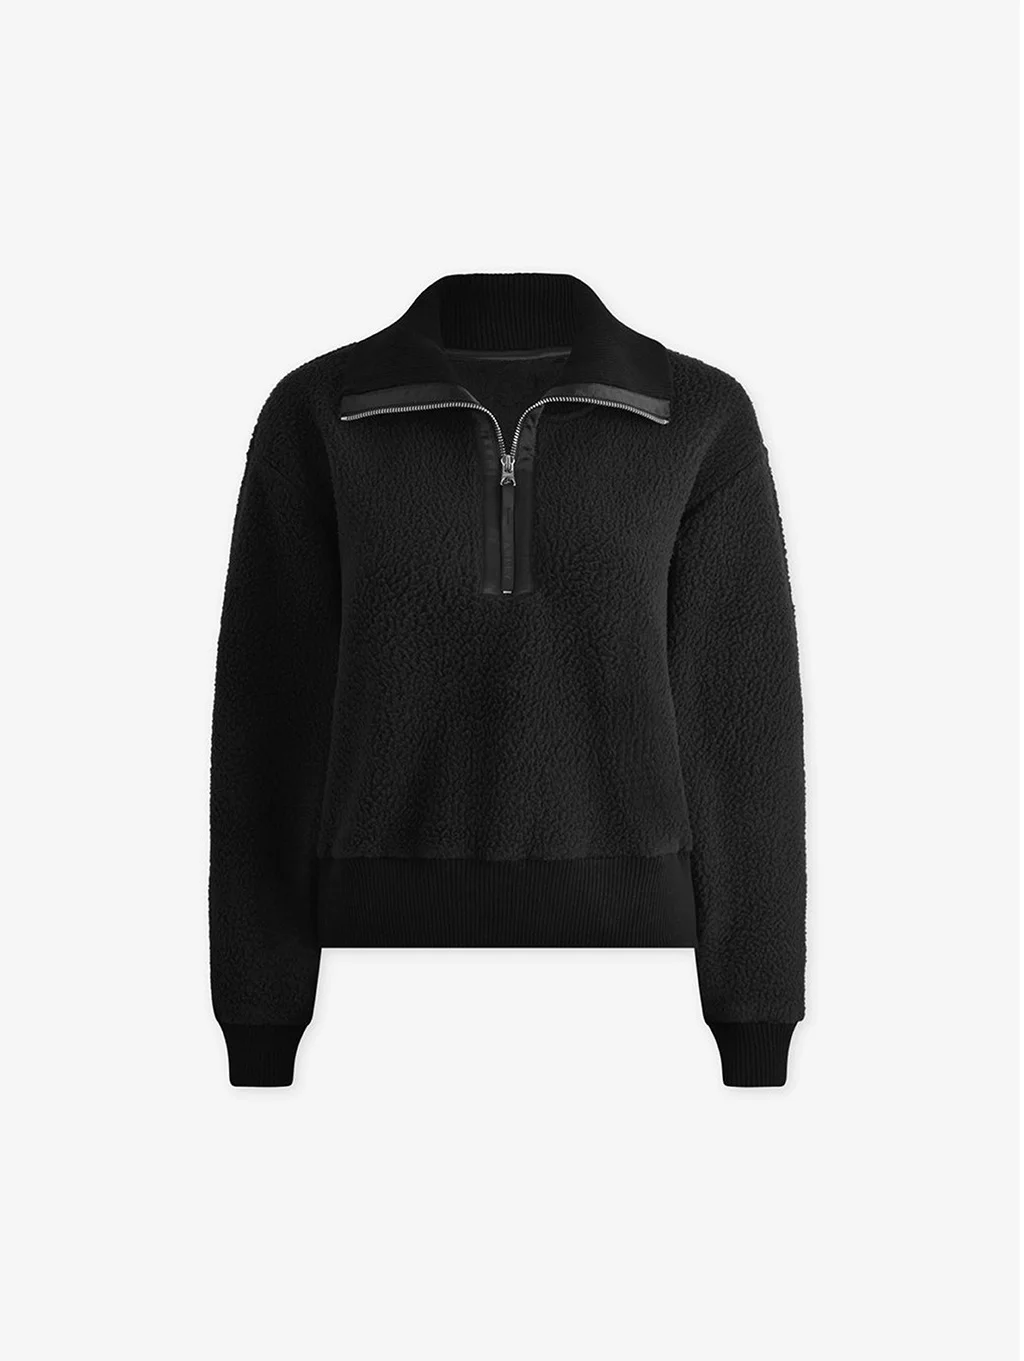 2023 New Half Zip Up Solid Fleece Coat High Quality Women Gym Sports Pullover Hoodie Top Casual Jacket Thick Coat